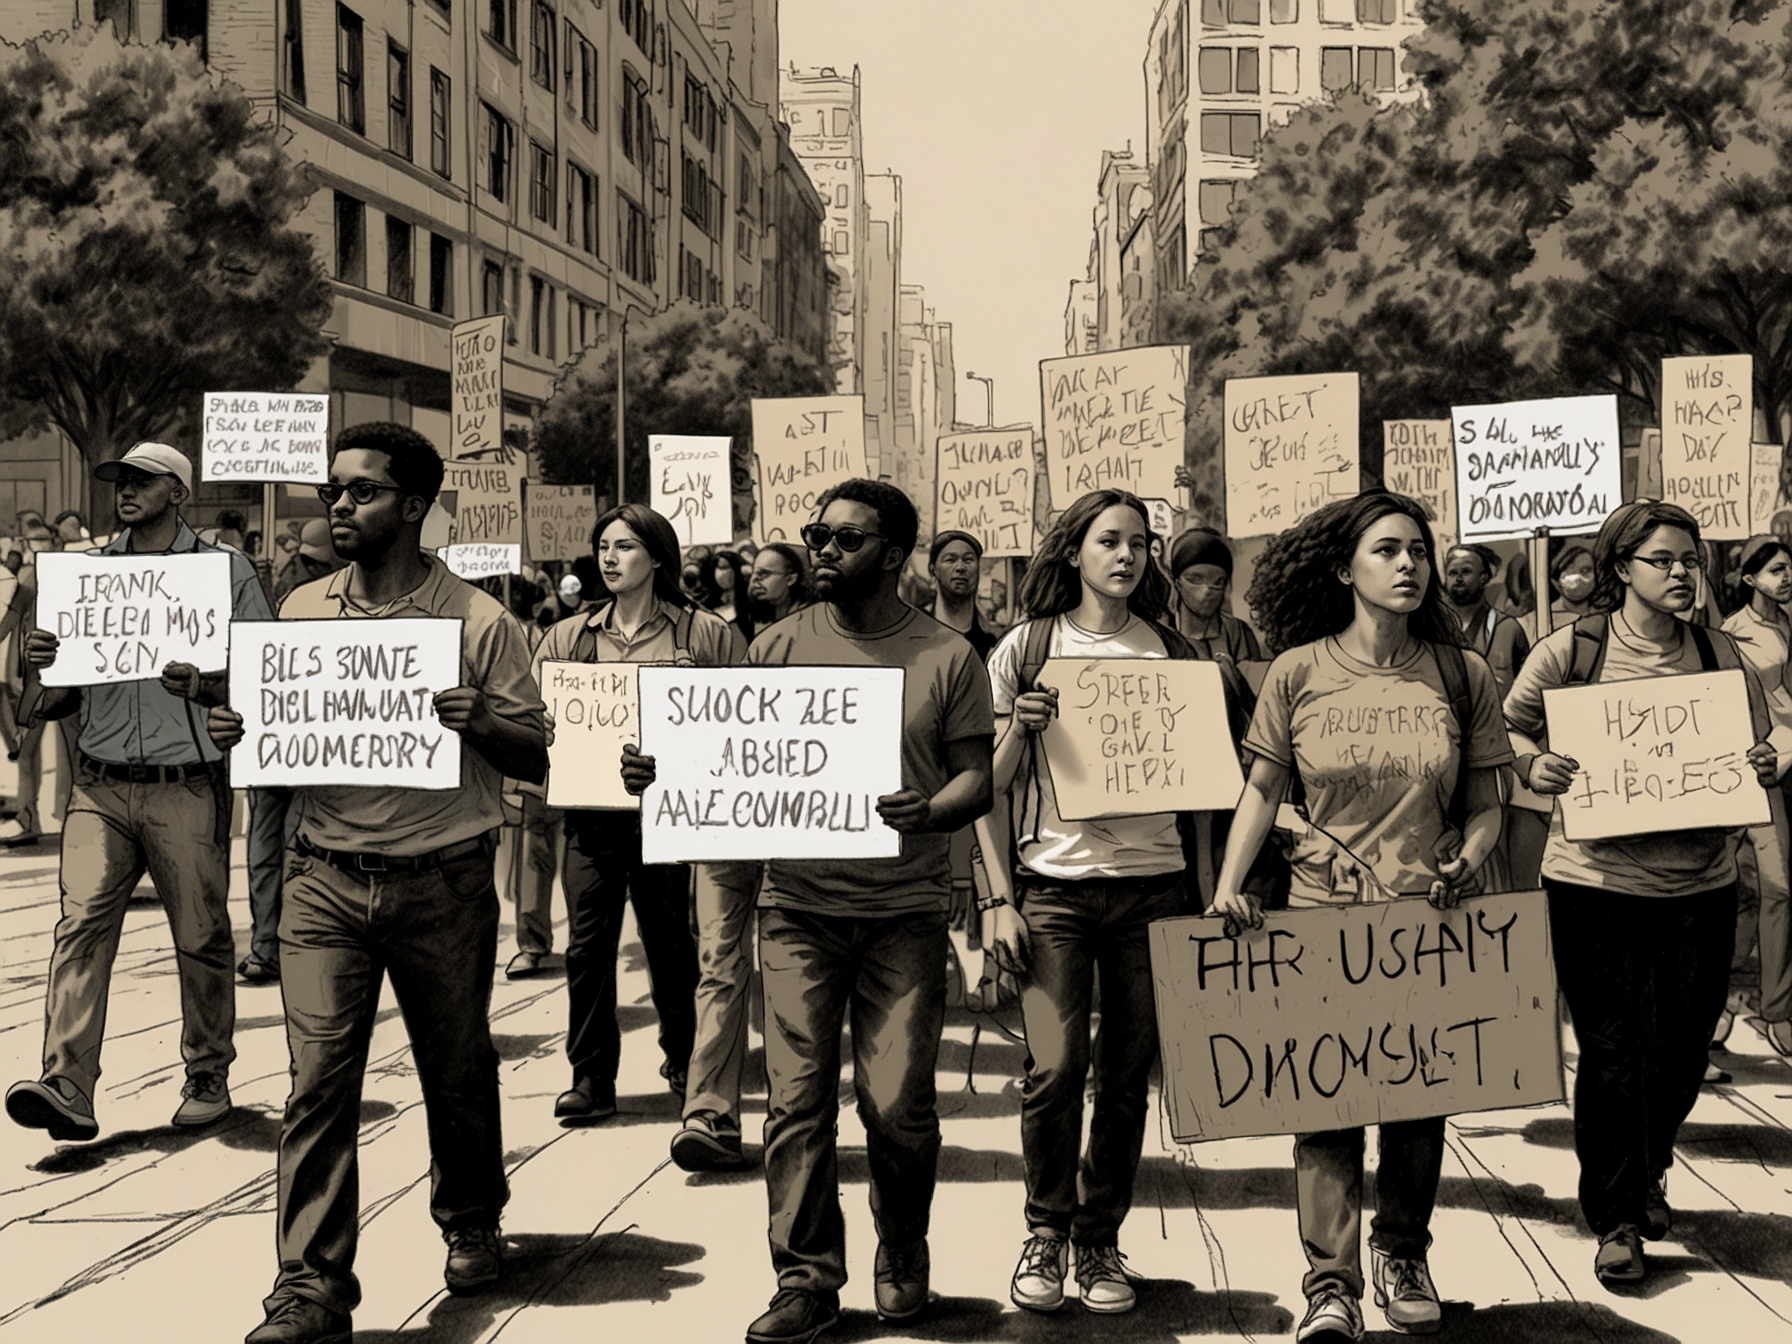 A depiction of a diverse group of protesters marching peacefully, holding signs and banners, symbolizing the public's right to dissent and seek accountability in a democracy.